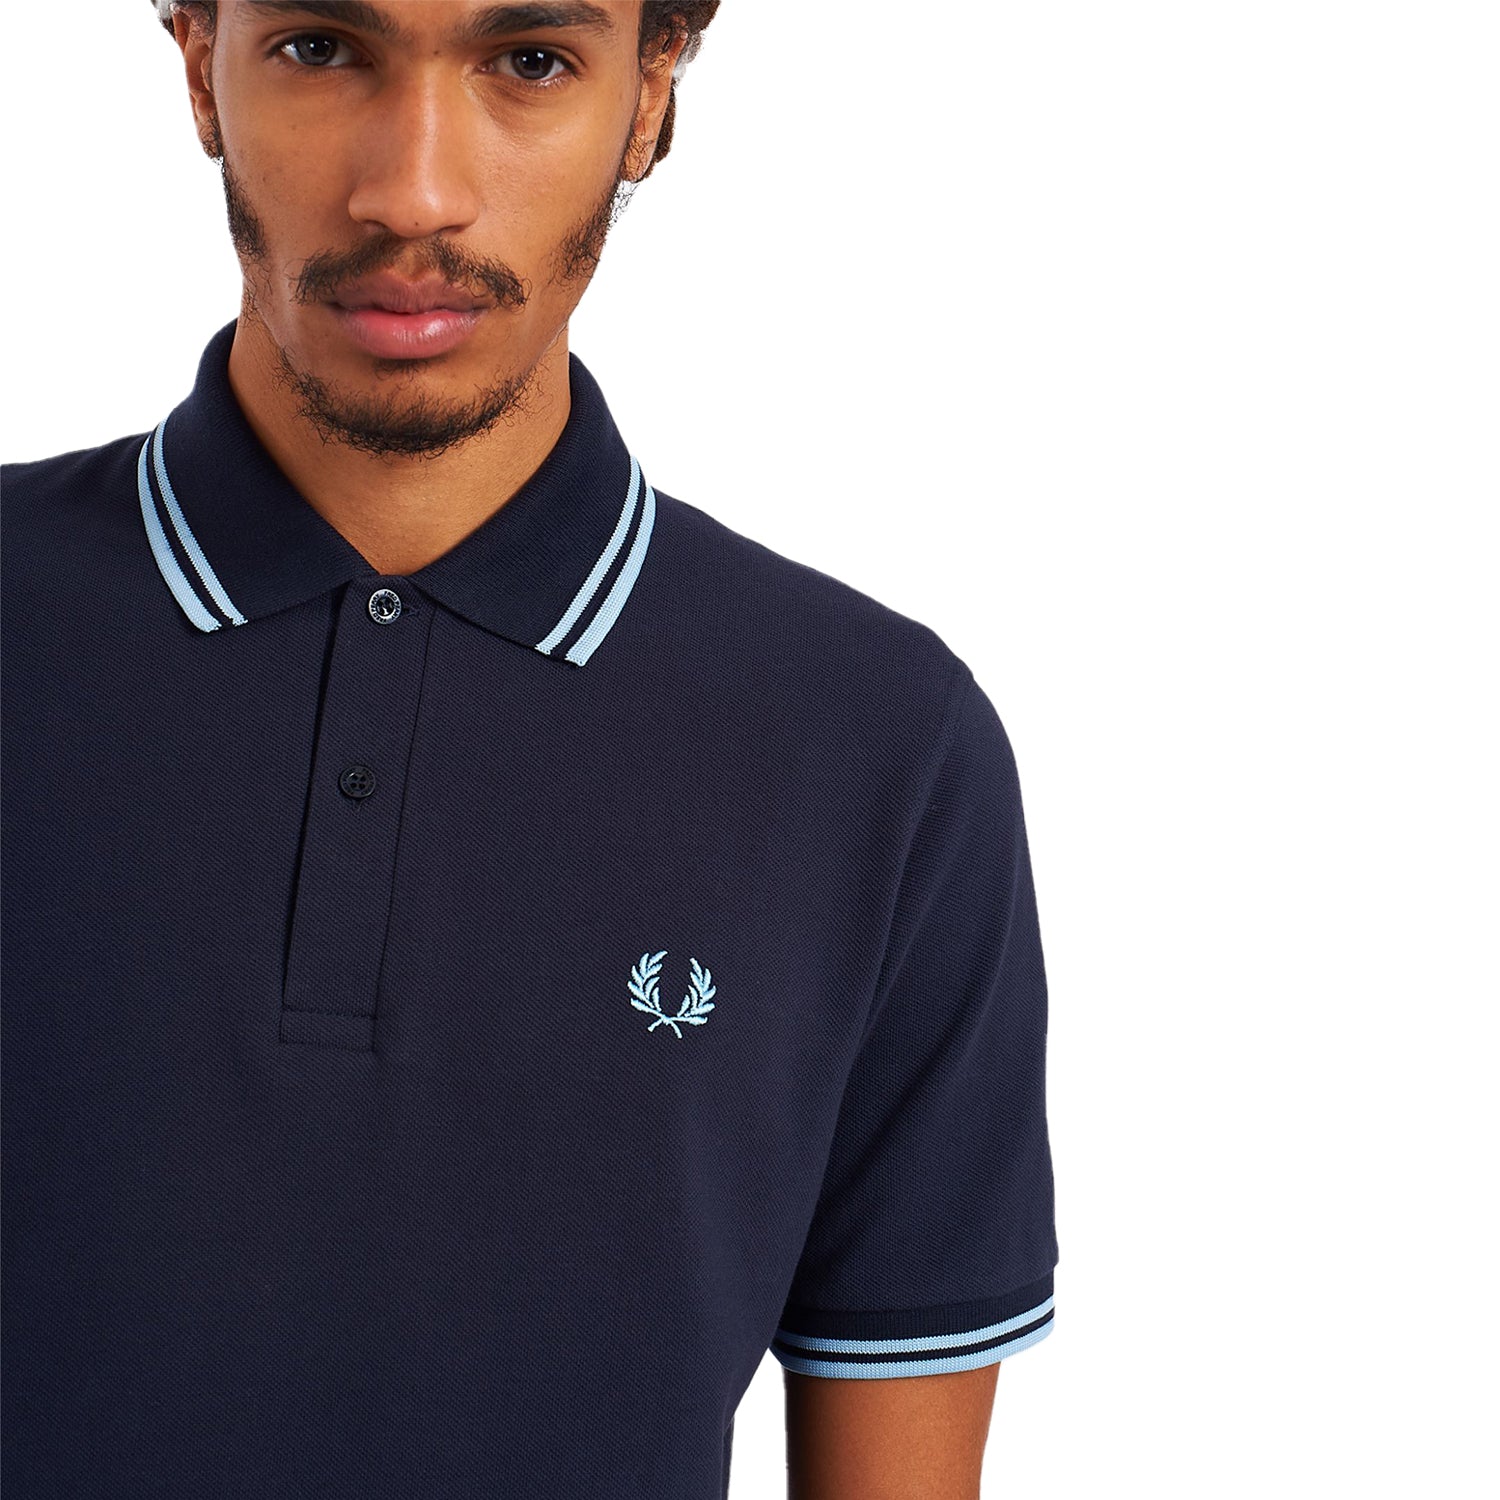 FRED PERRY M12 TWIN TIPPED POLO SHIRT - NAVY/ICE – Prime